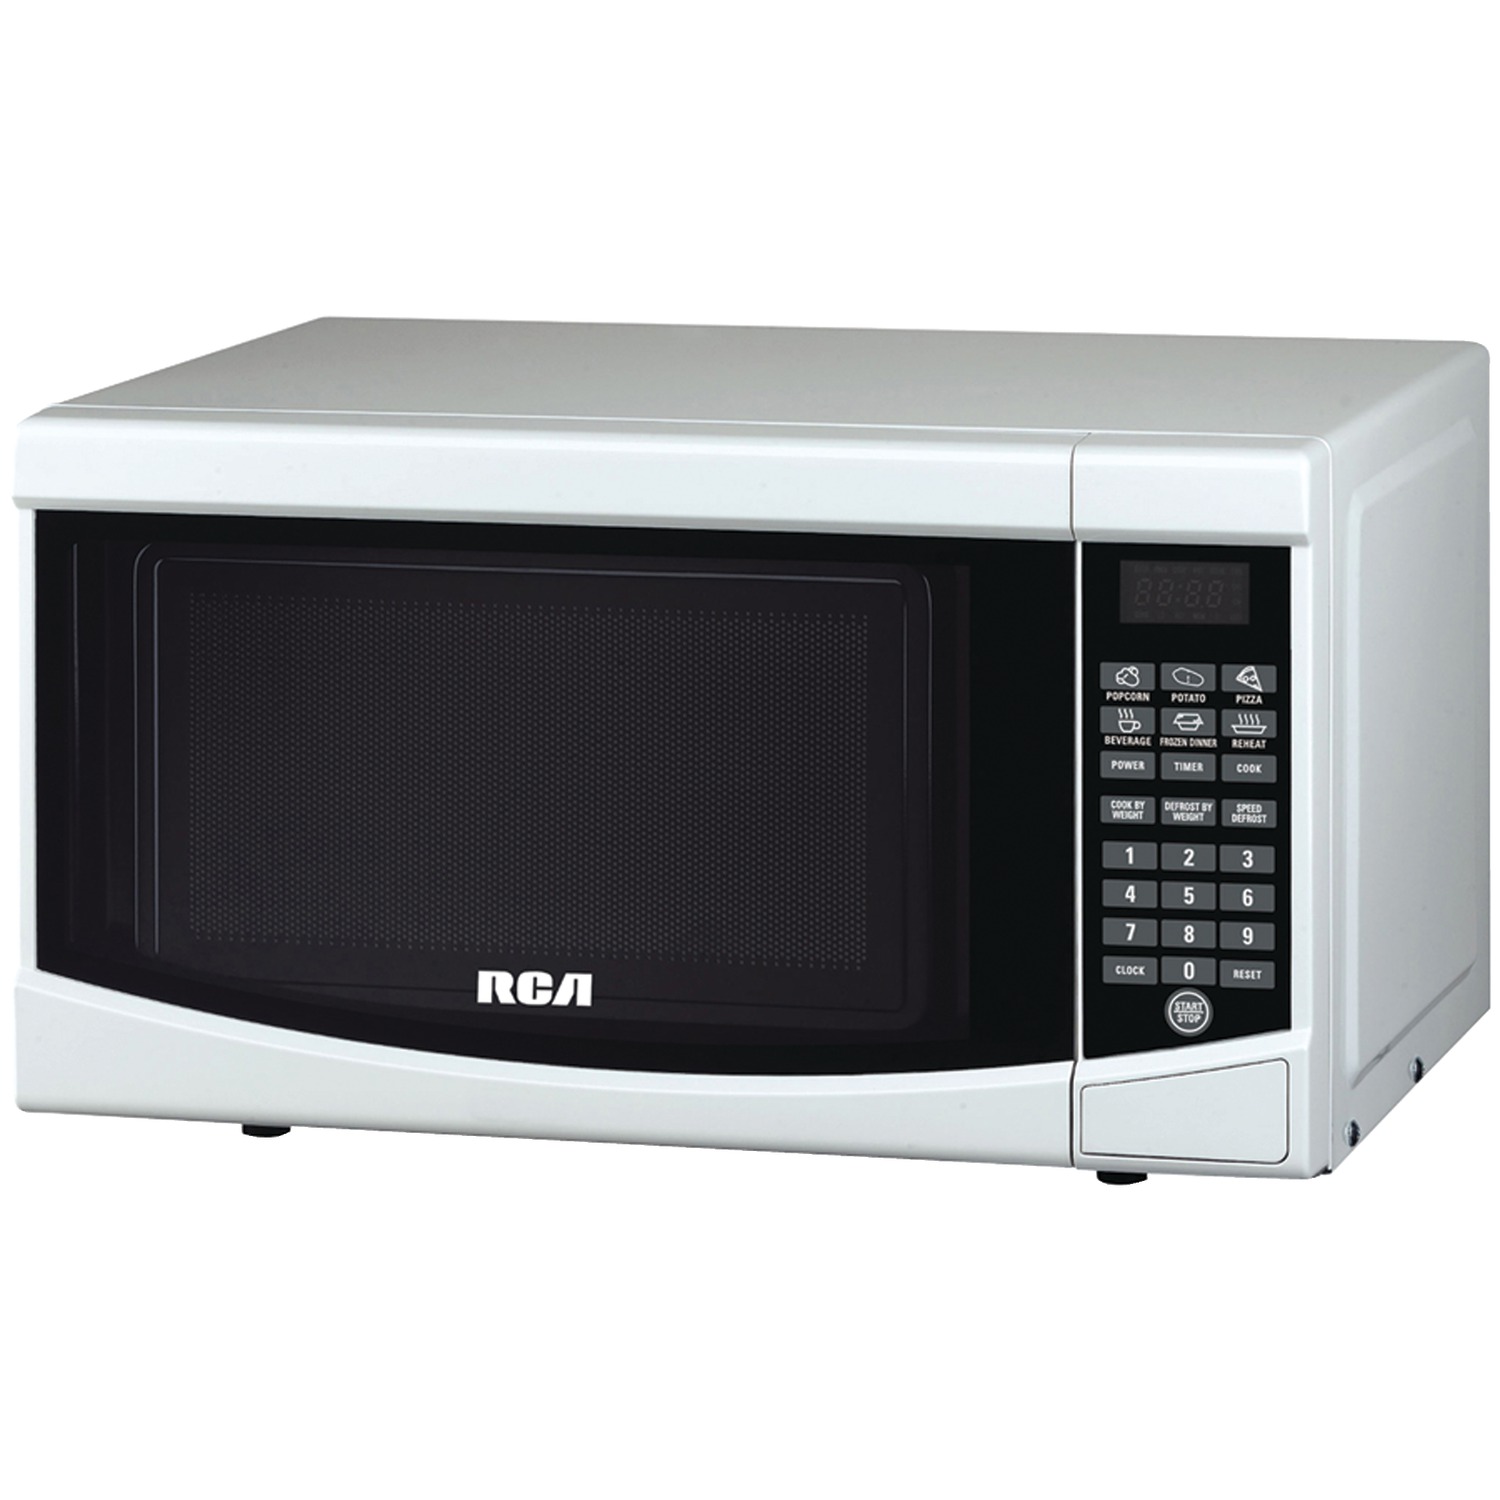 RCA New 0.7 Cu. ft. Countertop Microwave - White - image 1 of 5